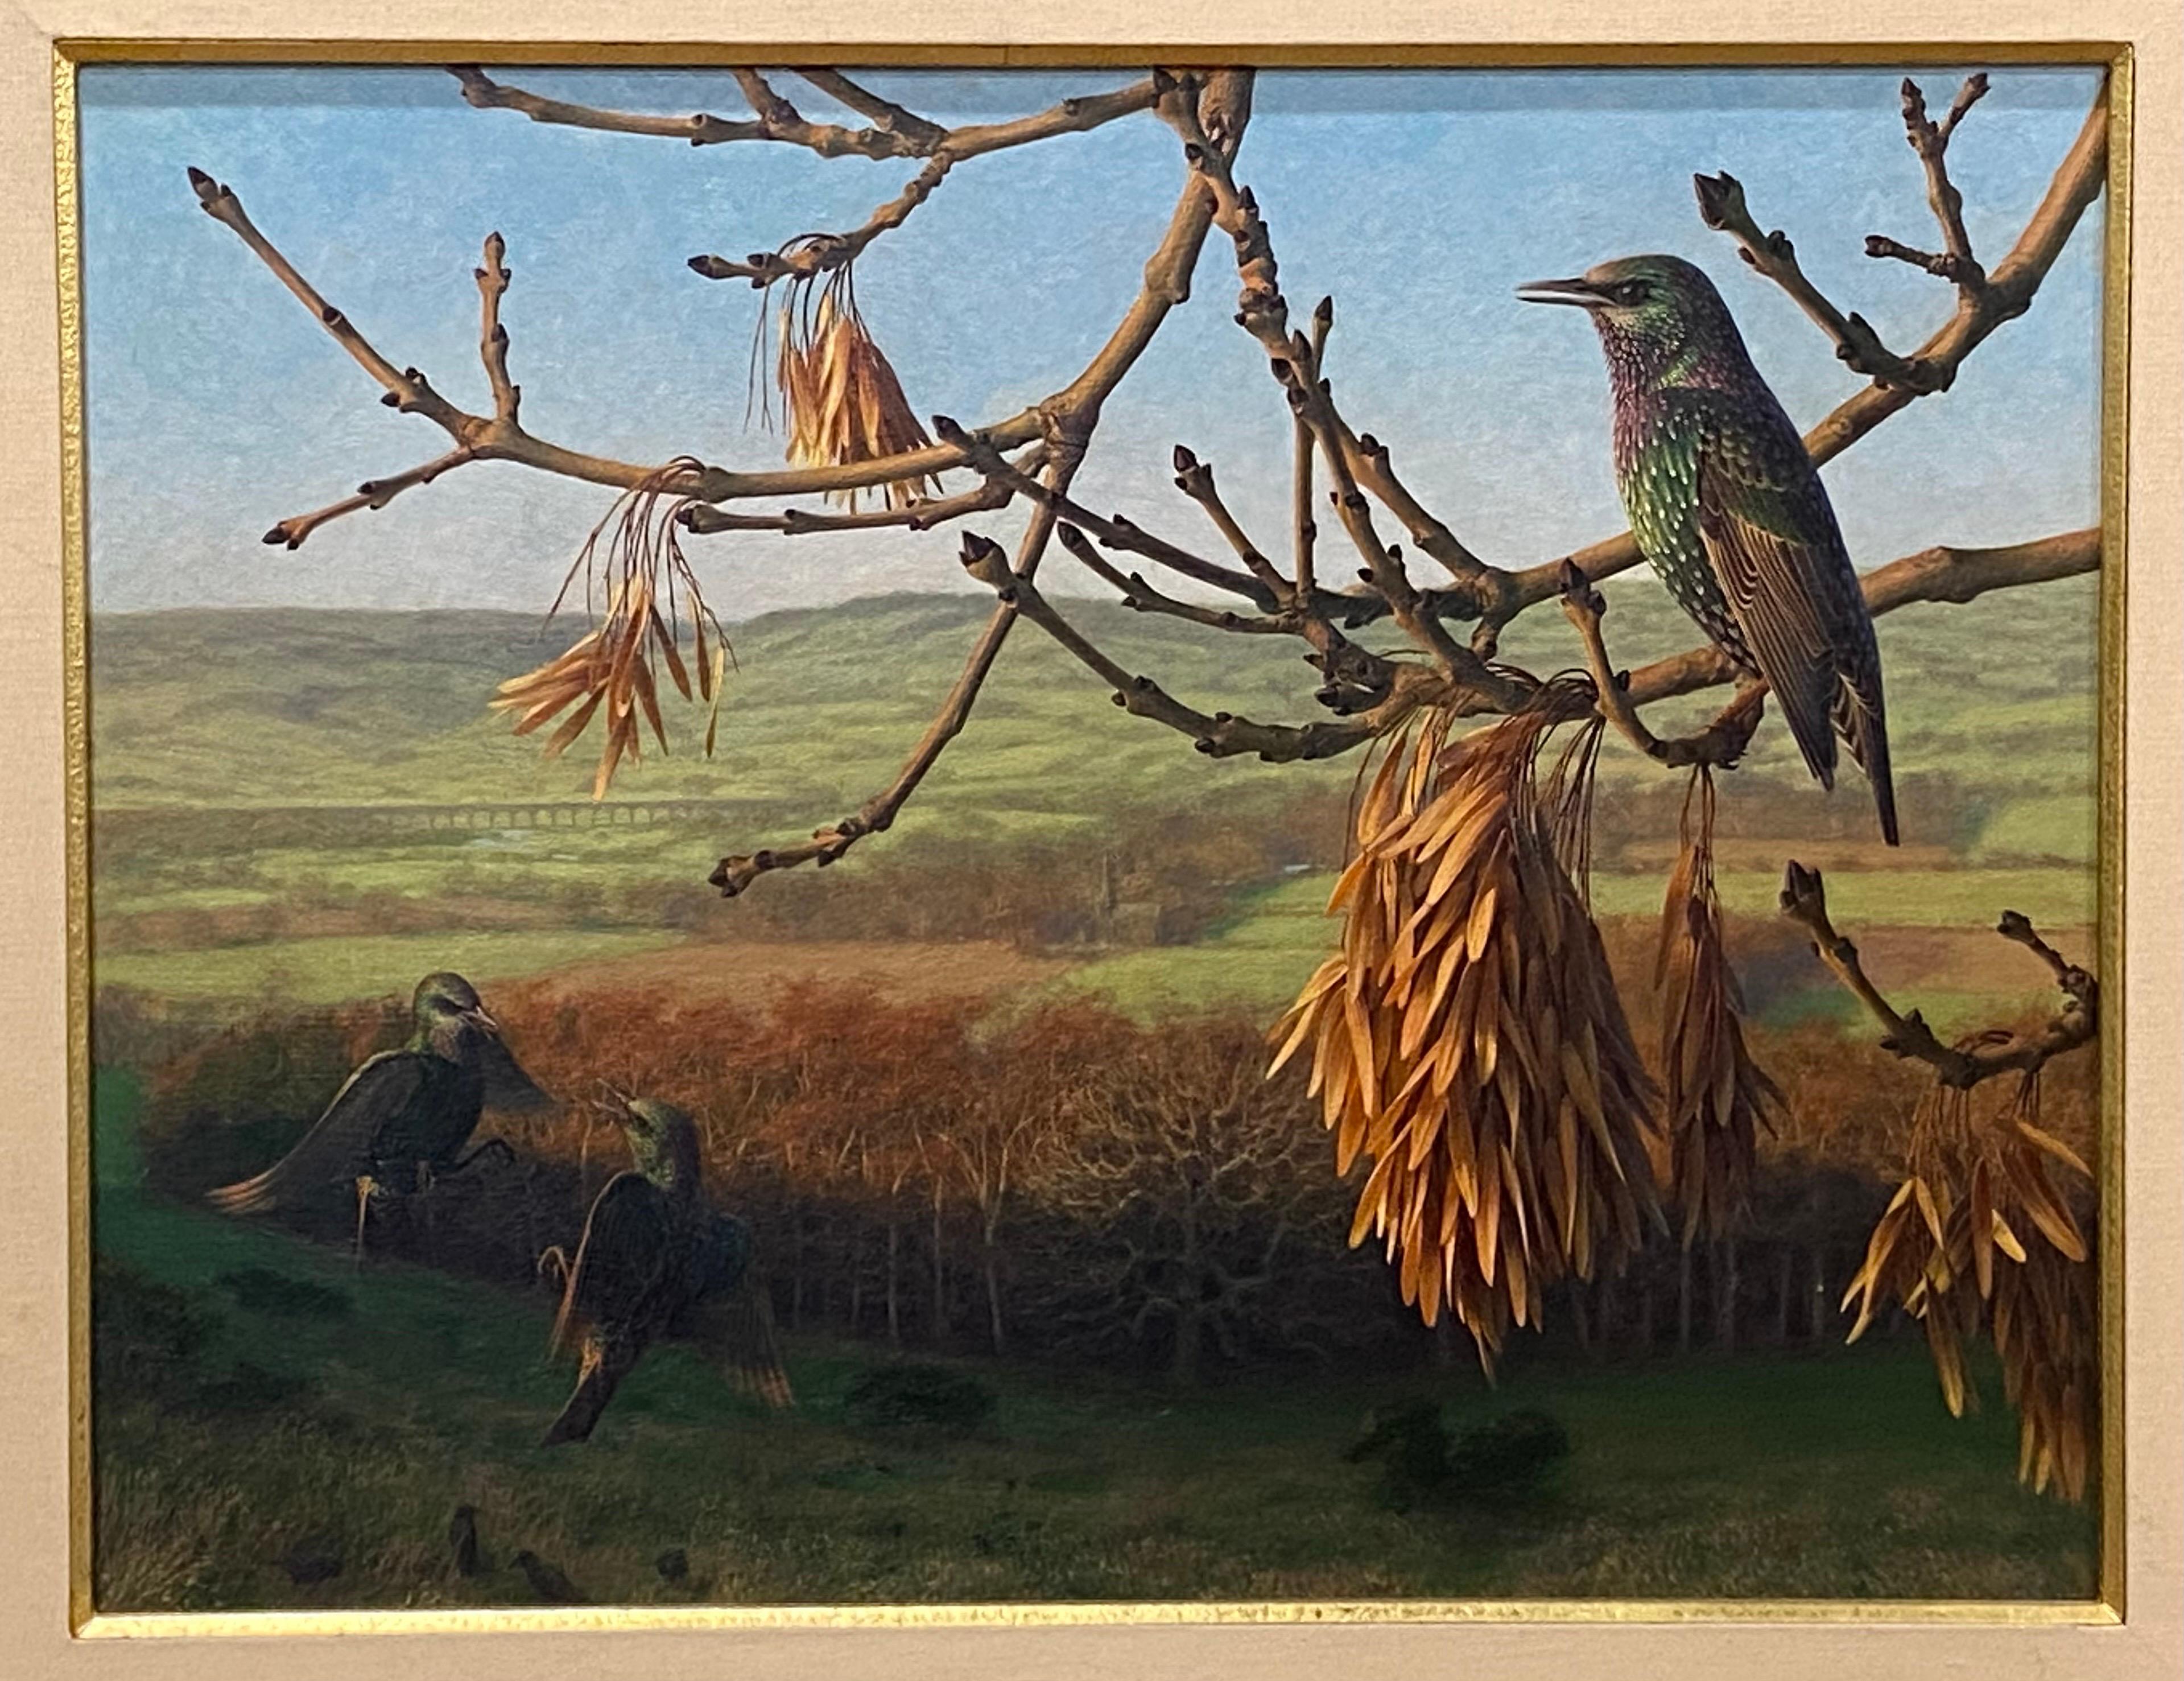 Starlings in a Winter Landscape by British artist Raymond C. Boothe (1929-2015). Oil on canvas in a hand carved custom frame. Framed the dimensions are 35